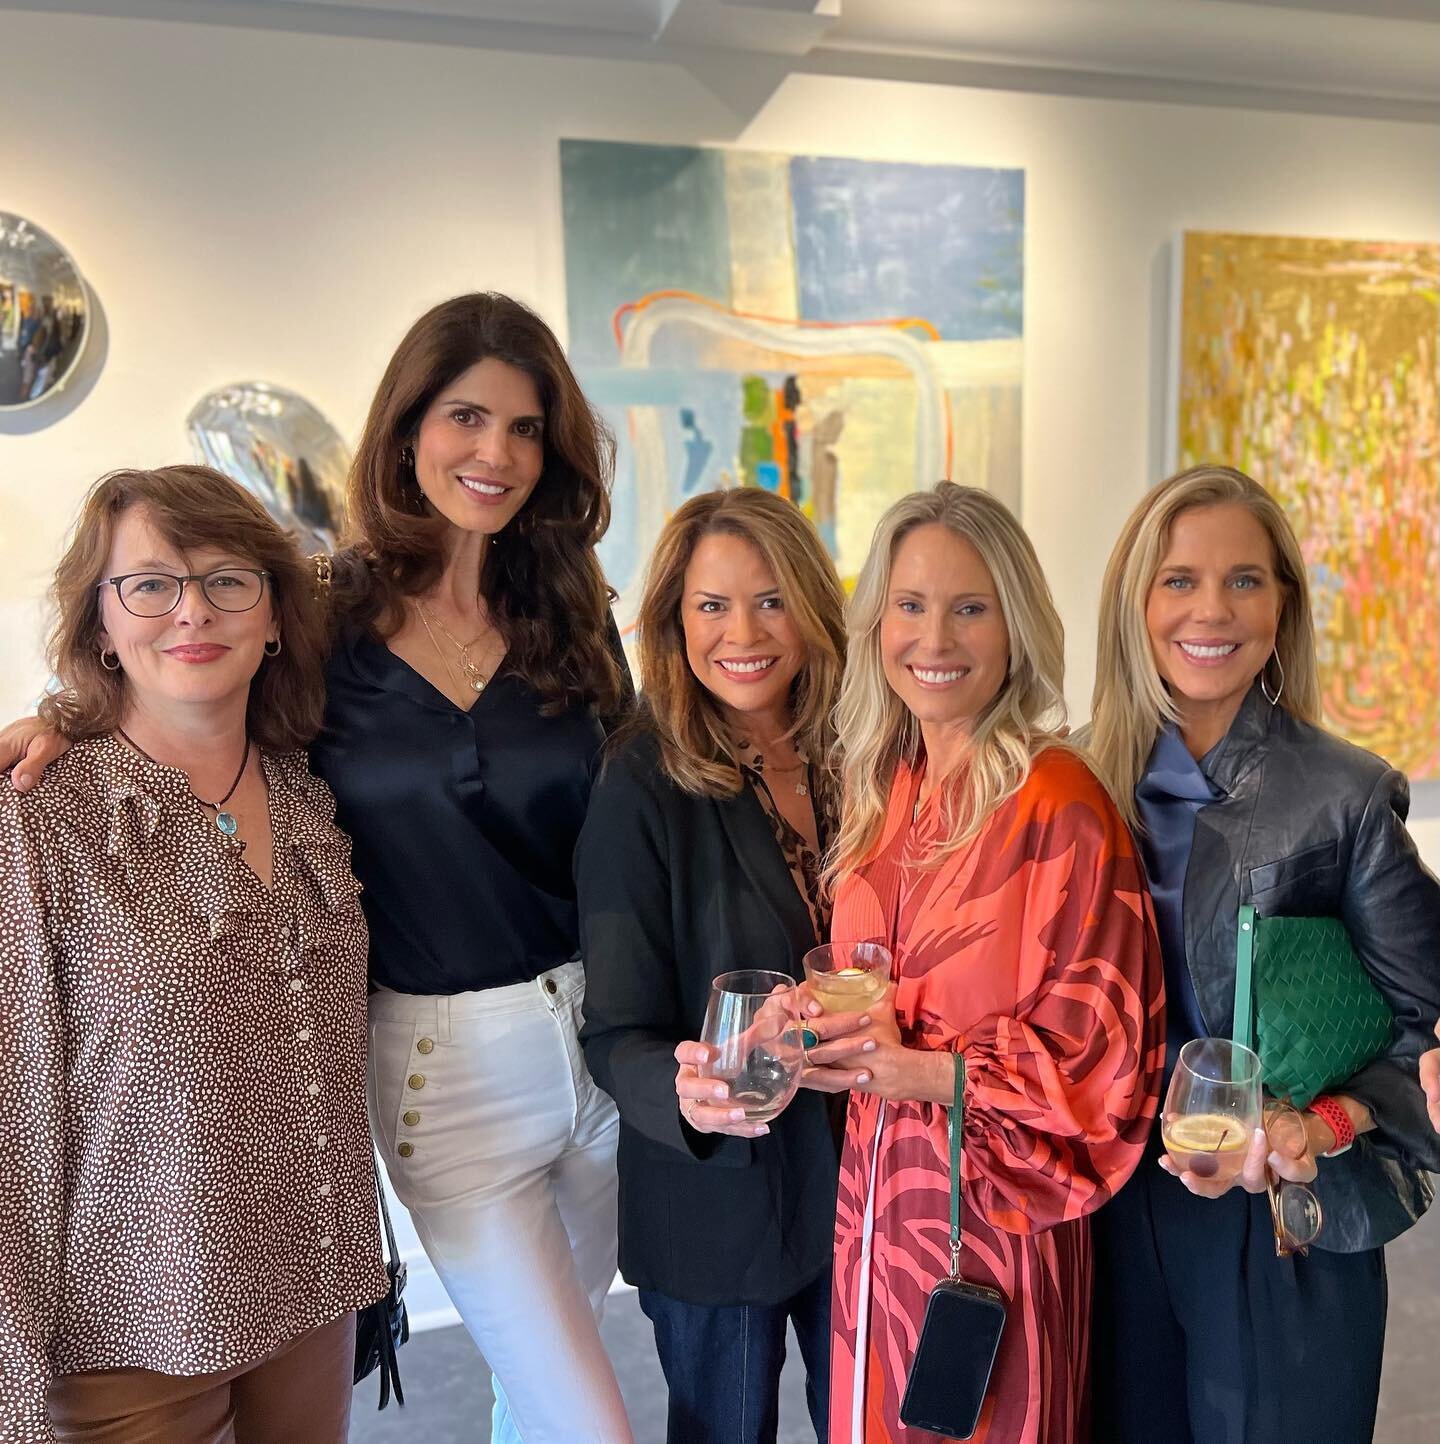 Celebrating our talented friend @klfolgnerstudio 🥂The show @monicafineart is beautiful!